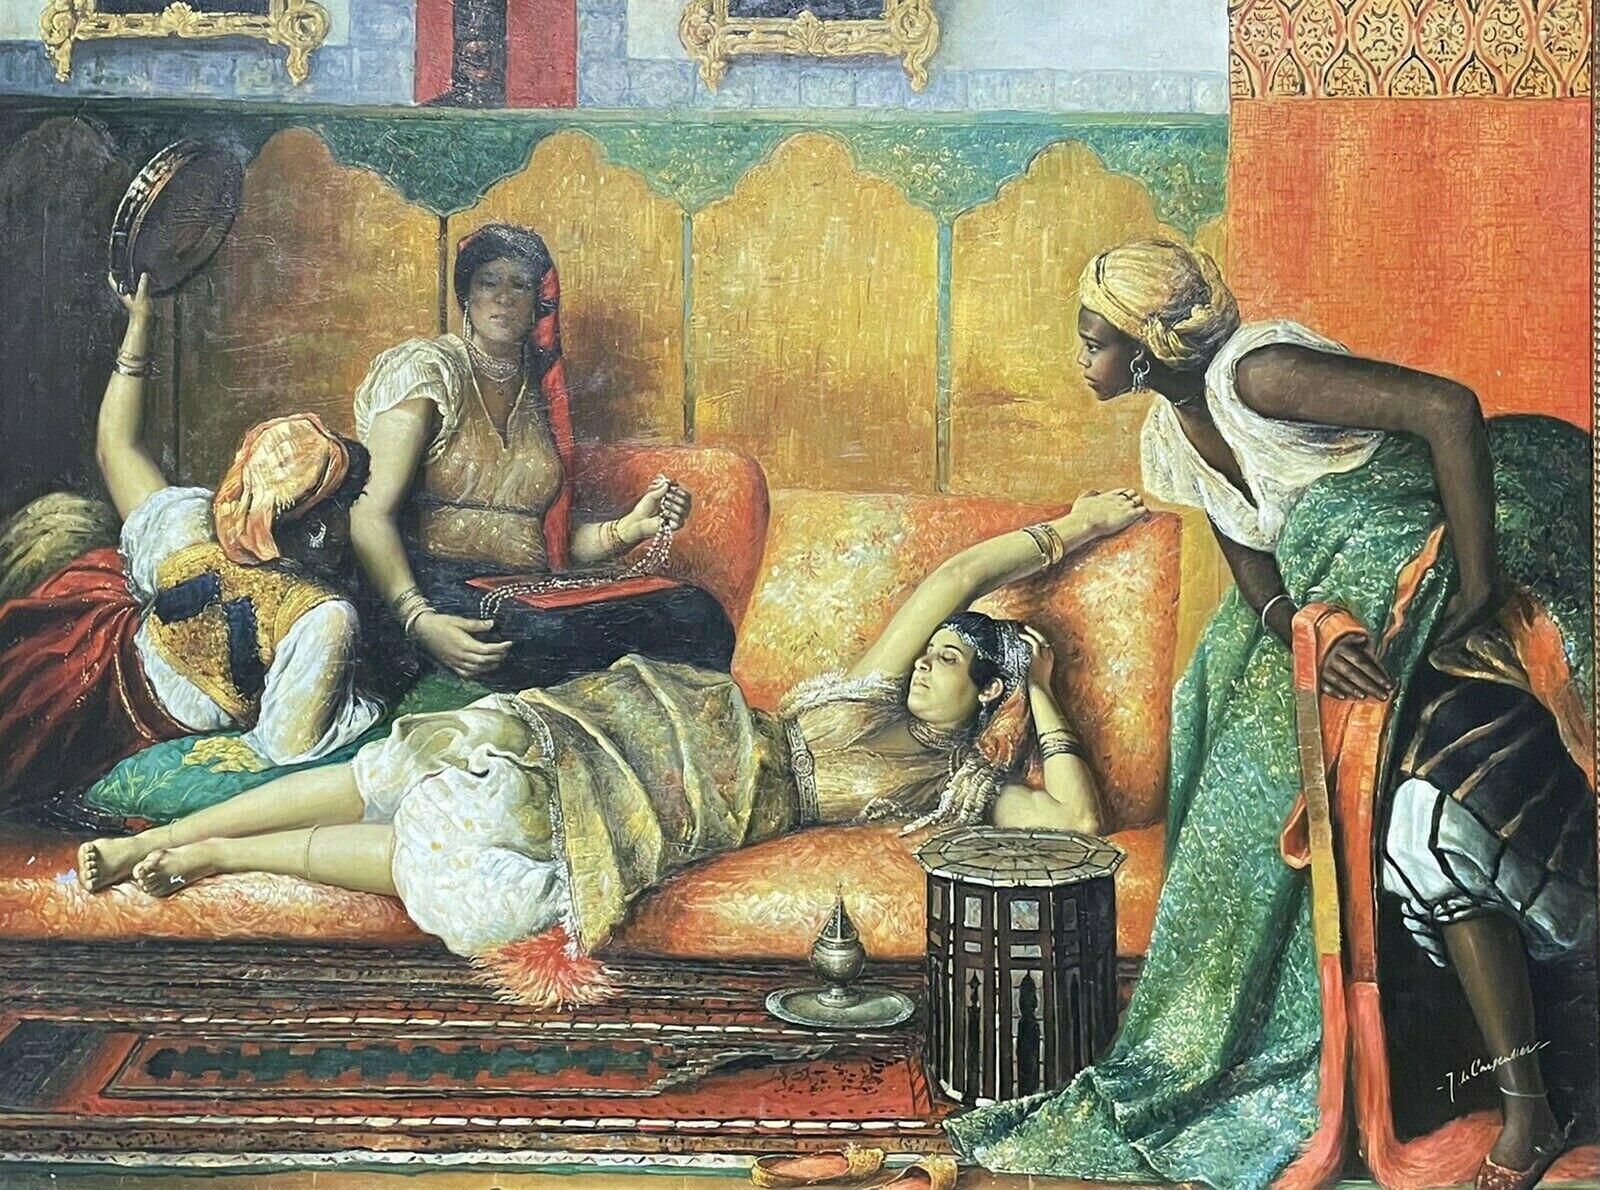 Artist/ School:
French School, late 20th century, indistinctly signed

Title: 
Orientalist harem interior scene

Medium: 
oil painting on canvas, framed

Size:  
frame: 41.5 x 53 inches 
painting: 35.5 x 47 inches

Provenance:
from a collection in